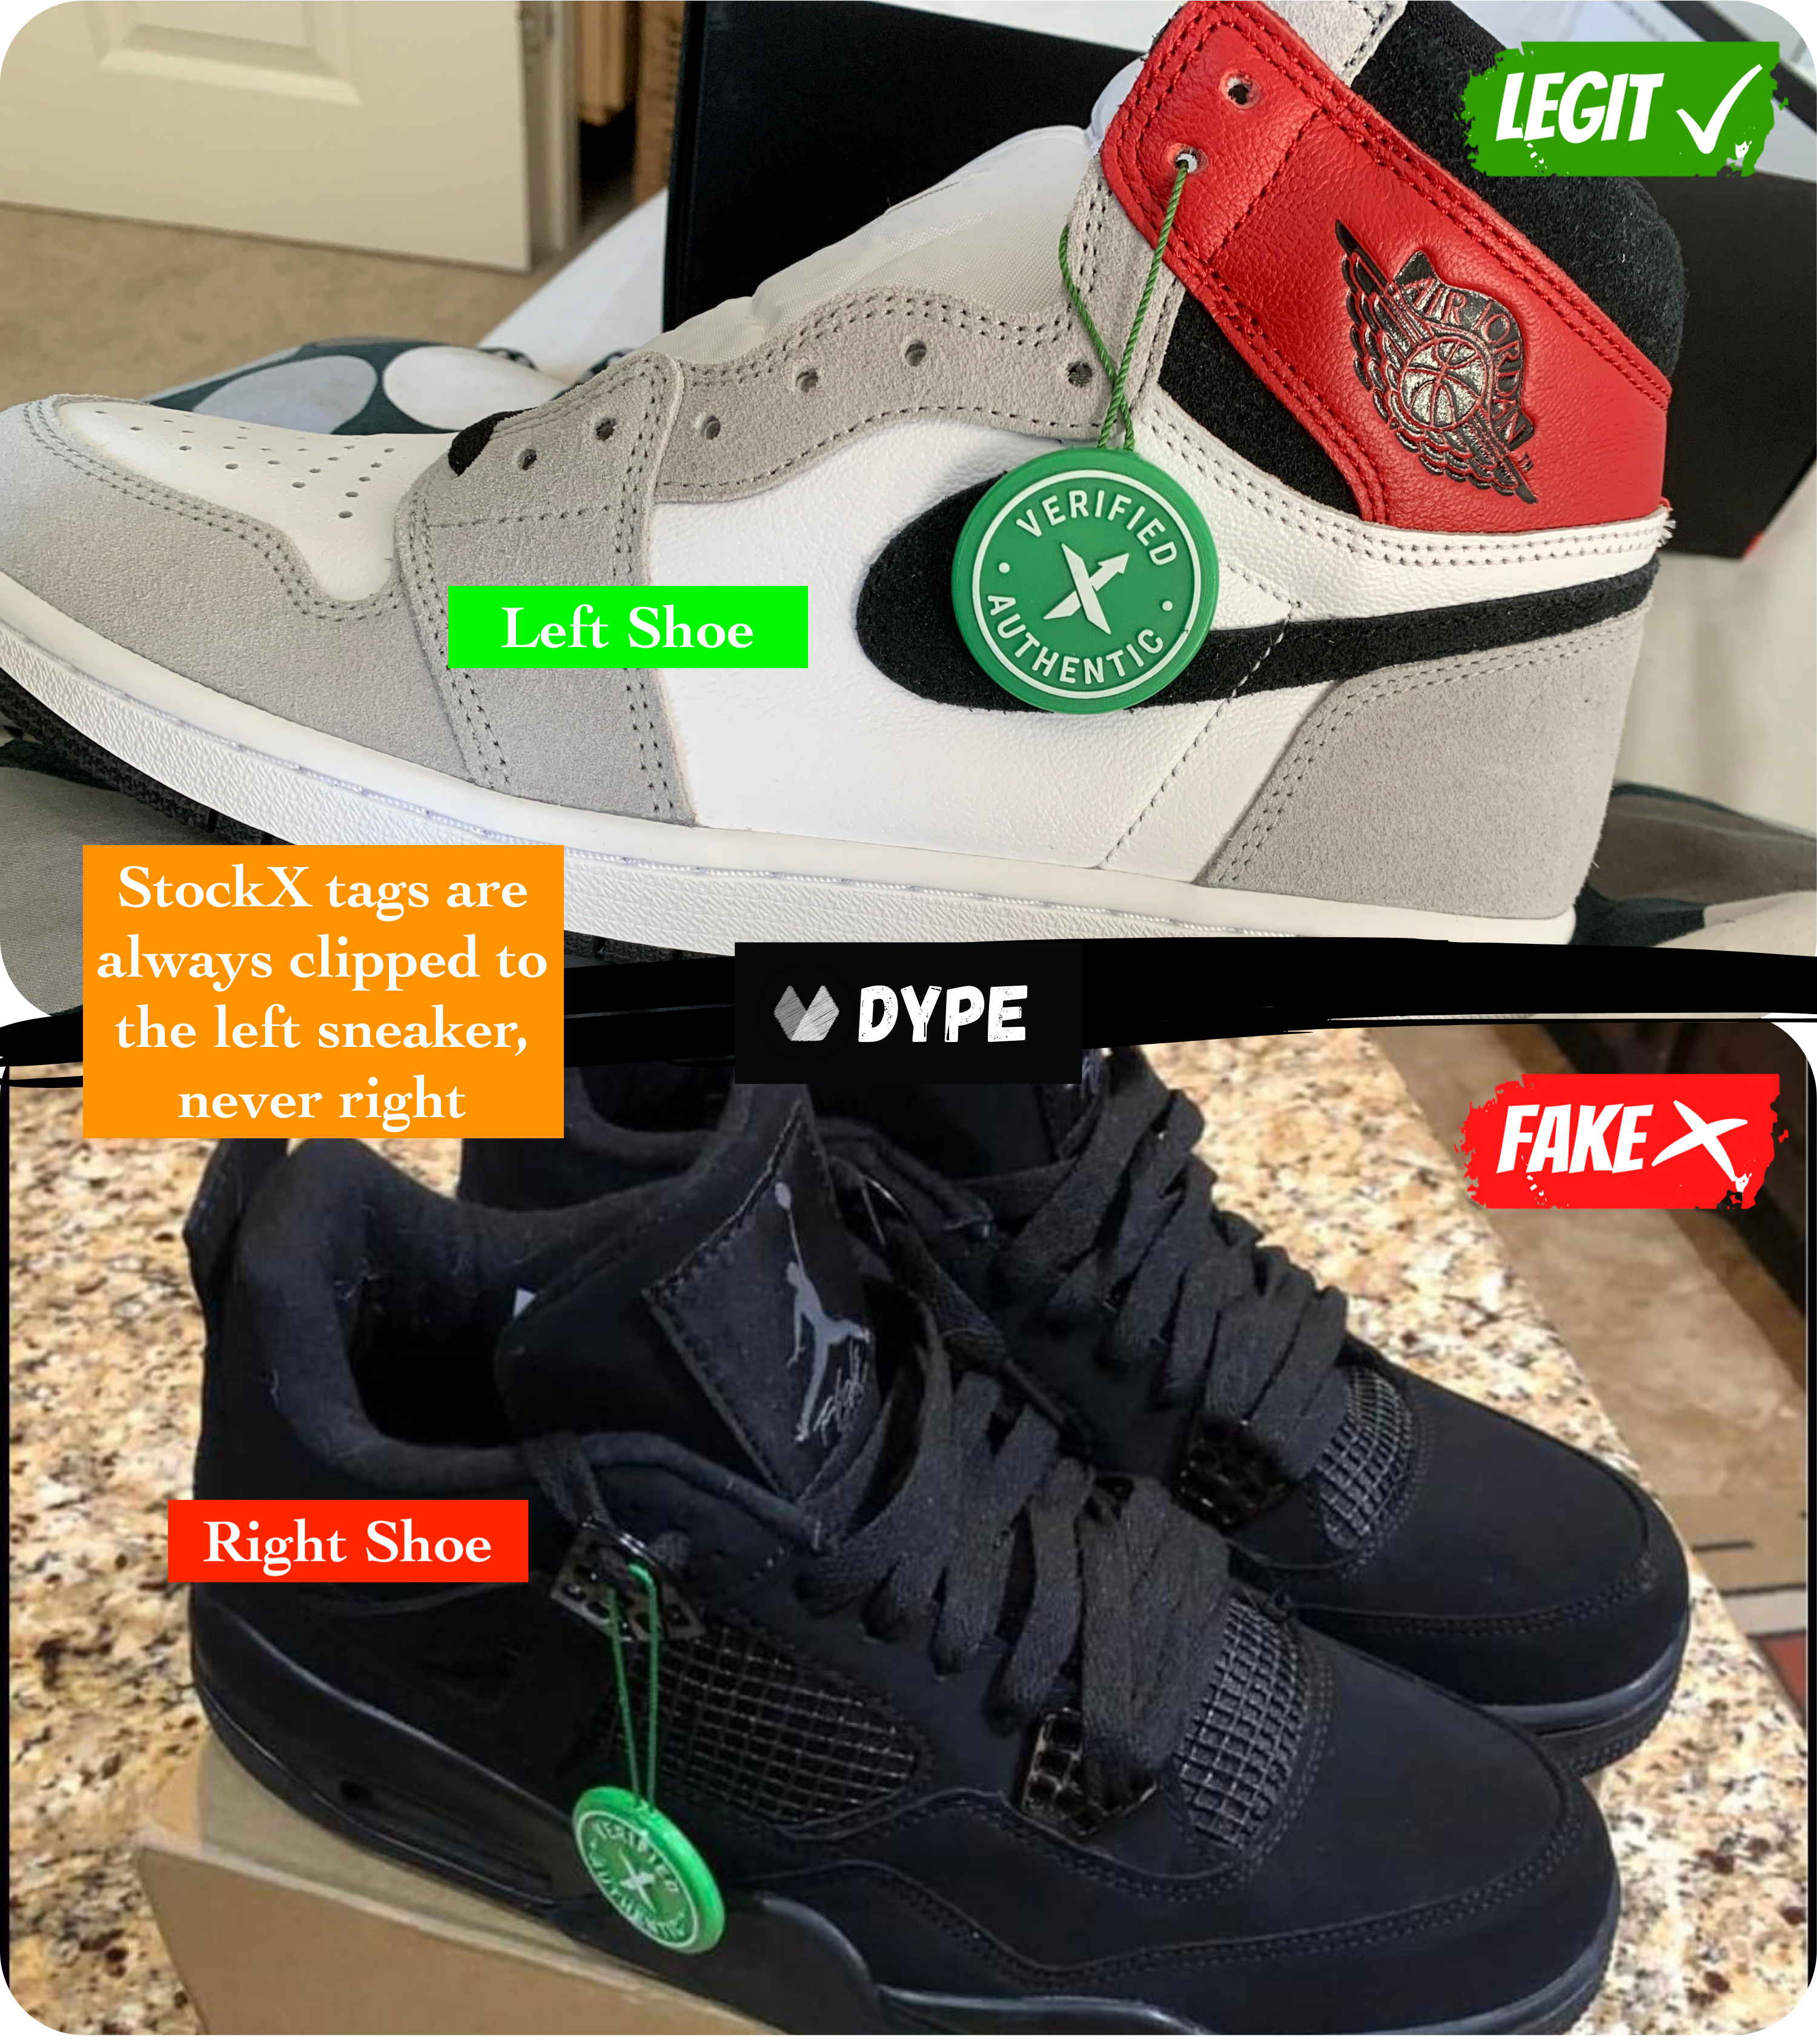 are stockx jordans real